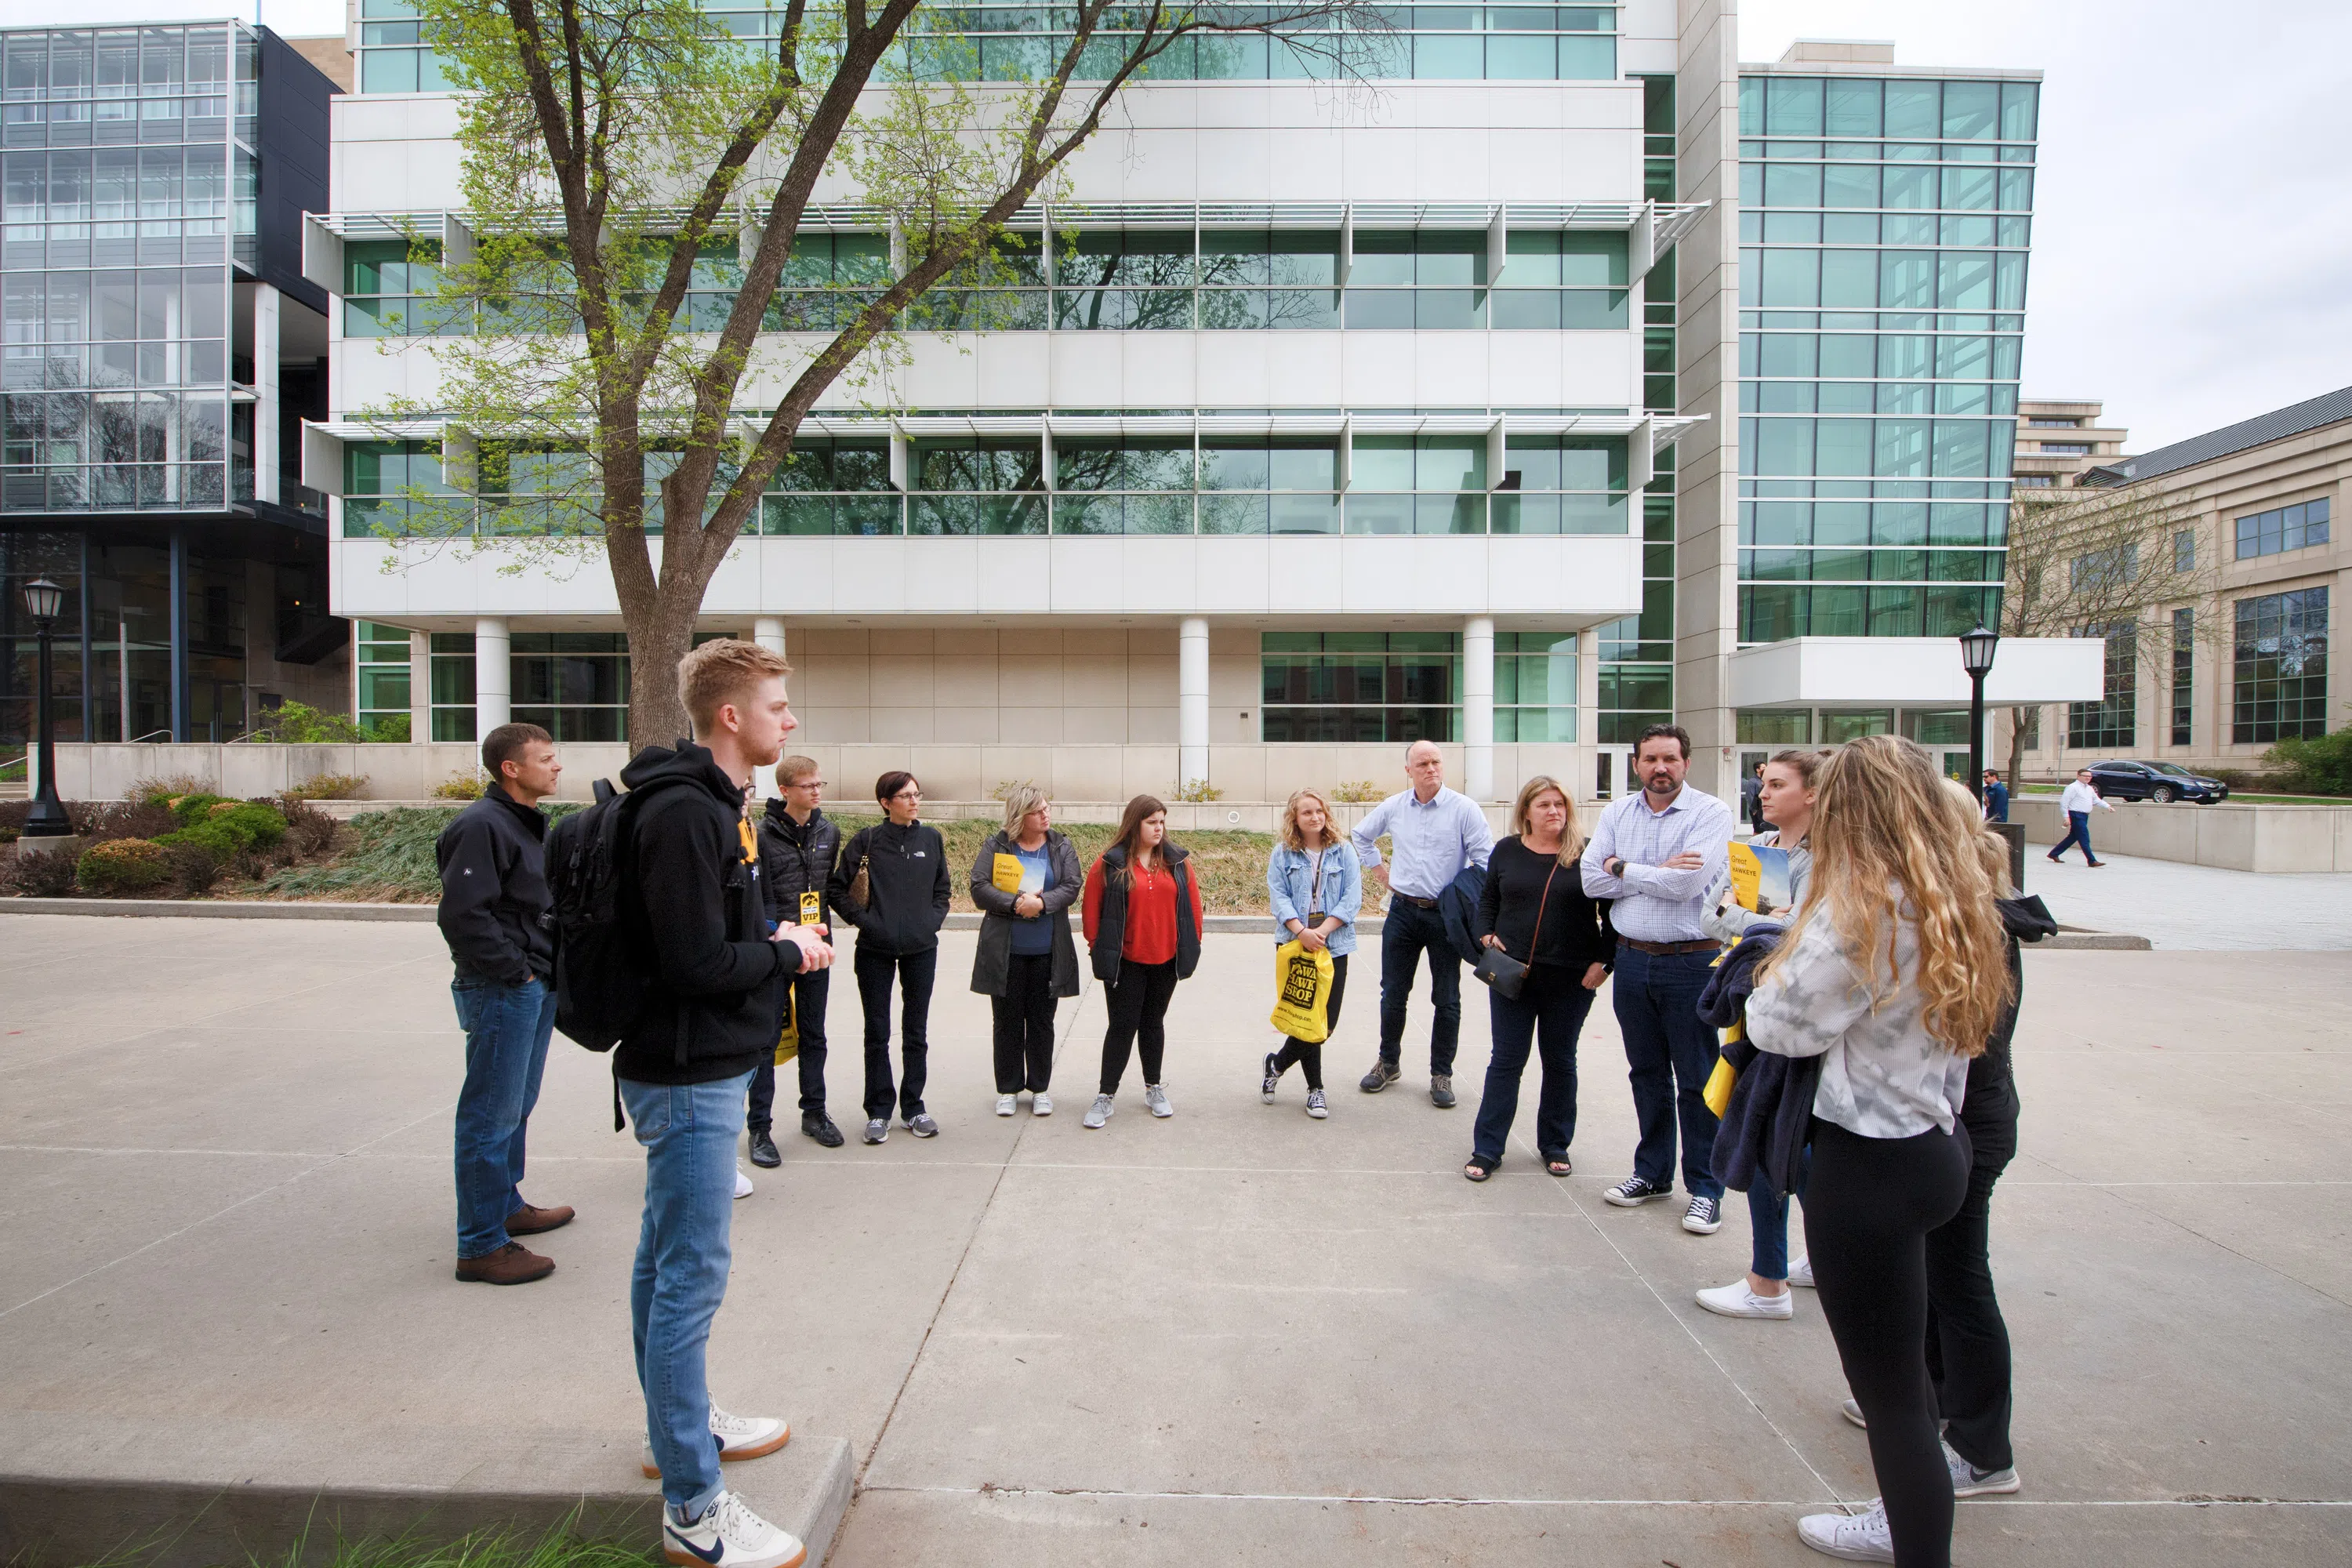 Group of students gathered outside the Pomerantz Center building before a campus tour.